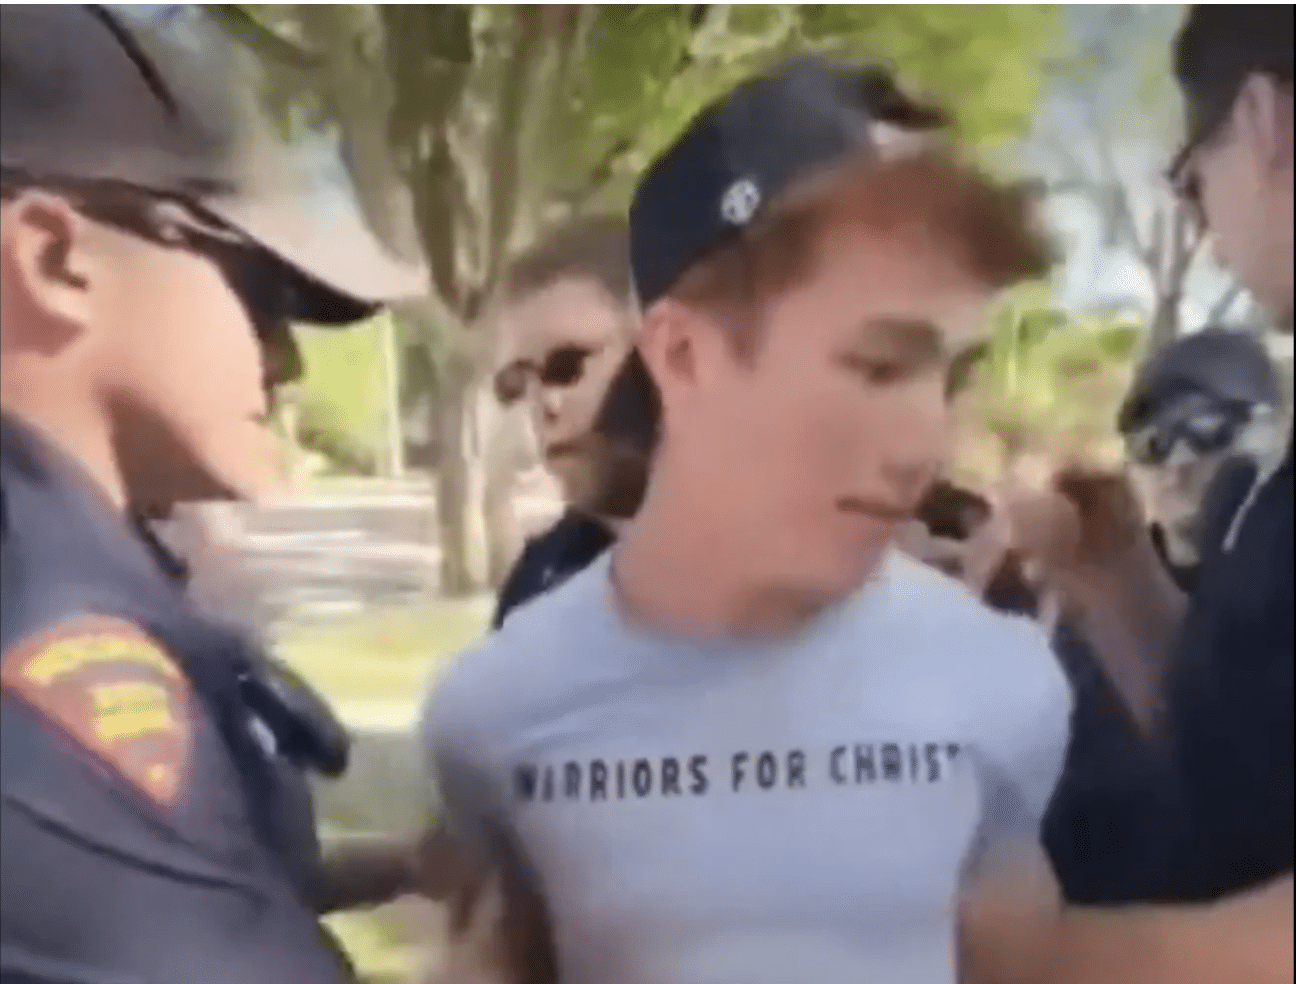 (WATCH) Wisconsin police arrest young Christians protesting drag queen event for kids